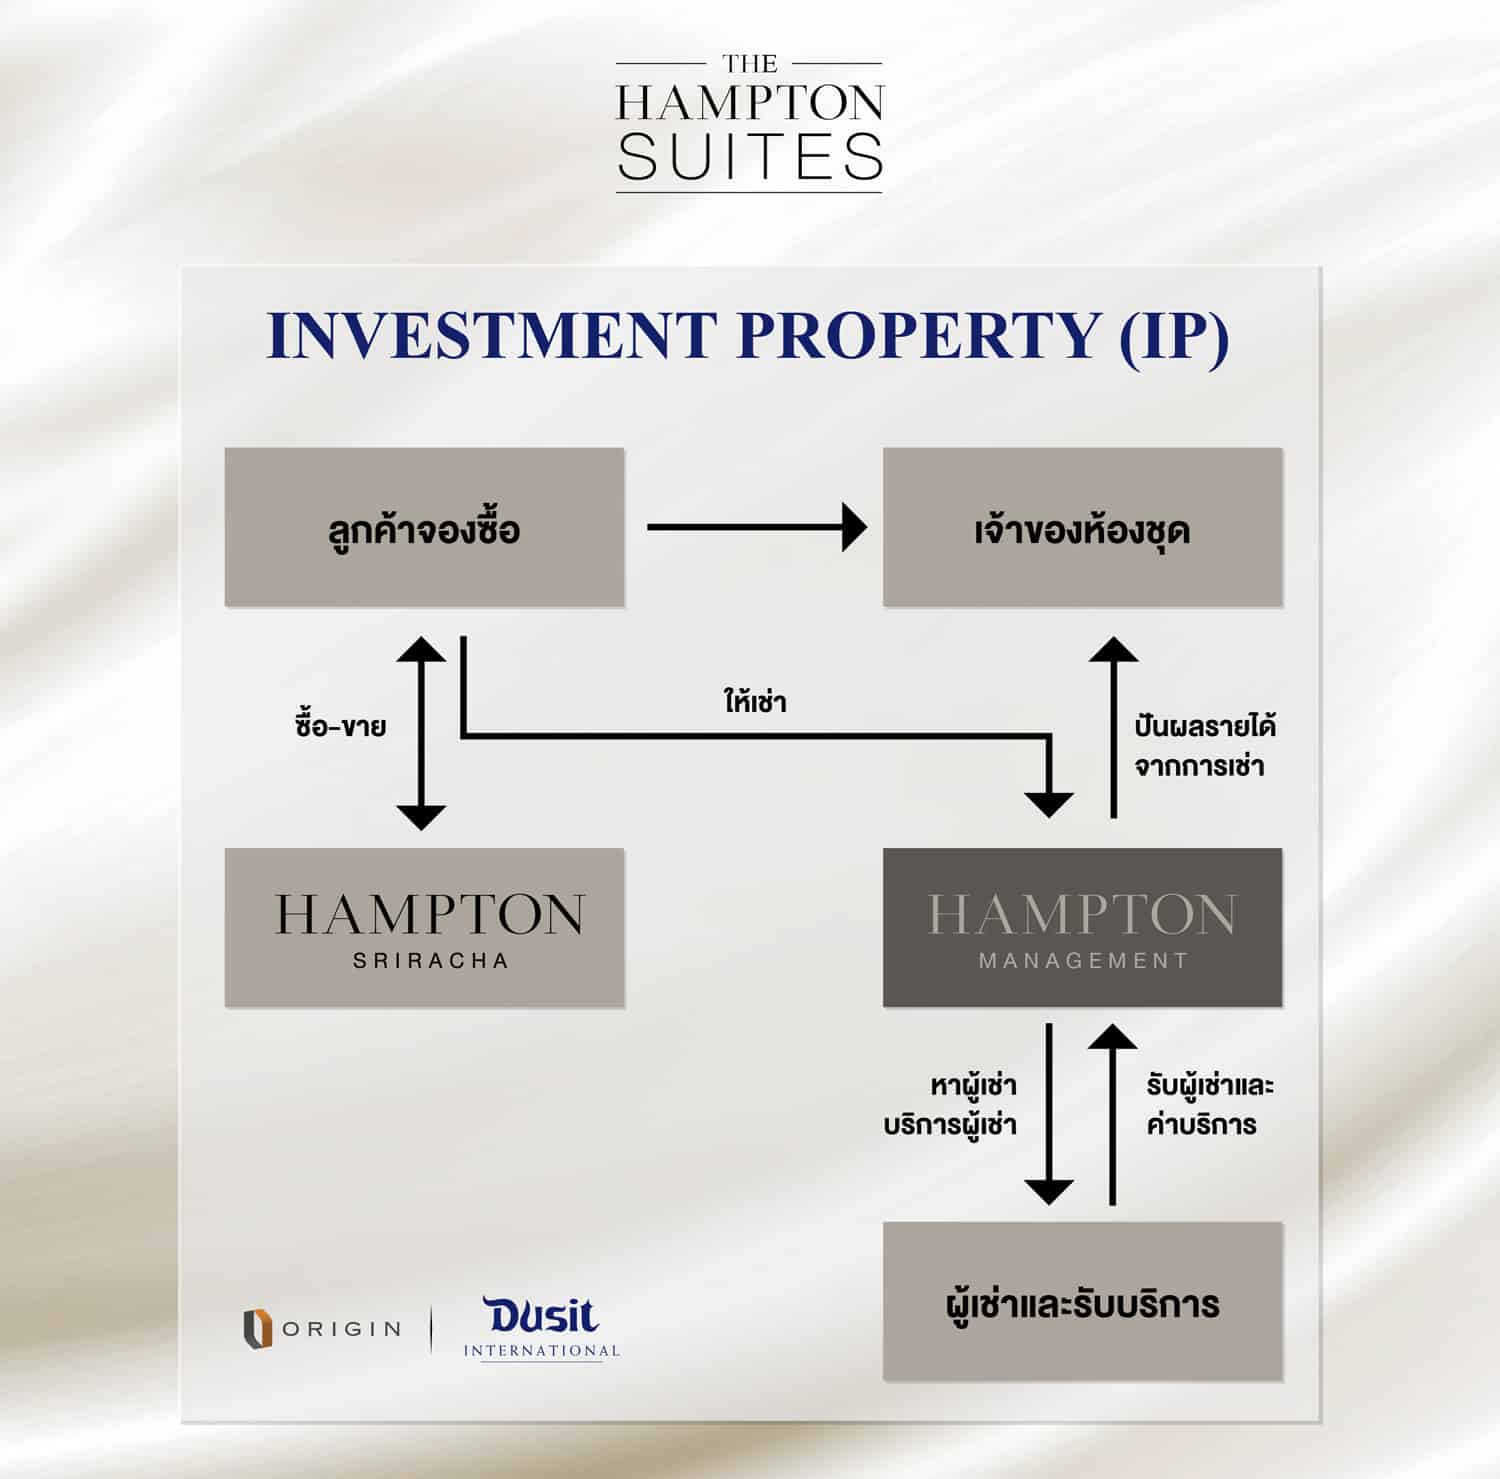 Investment Property (IP)